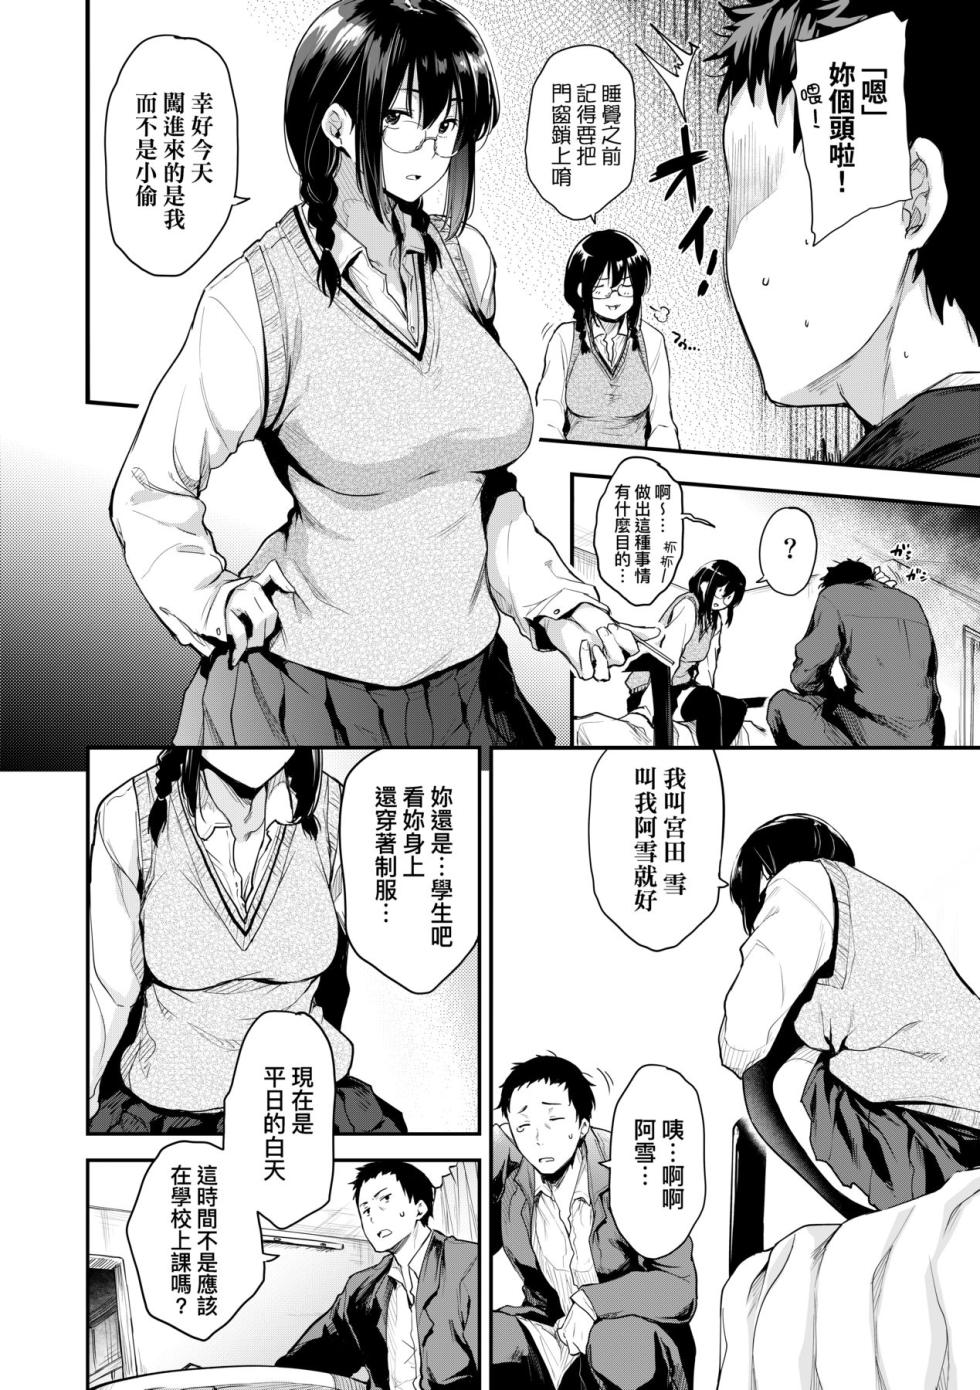 [Barlun] Chichi to Megane to Etc - Boobs, glasses and etc... | 乳與眼鏡與其他性癖 [Chinese]  [Decensored] [Digital] - Page 17